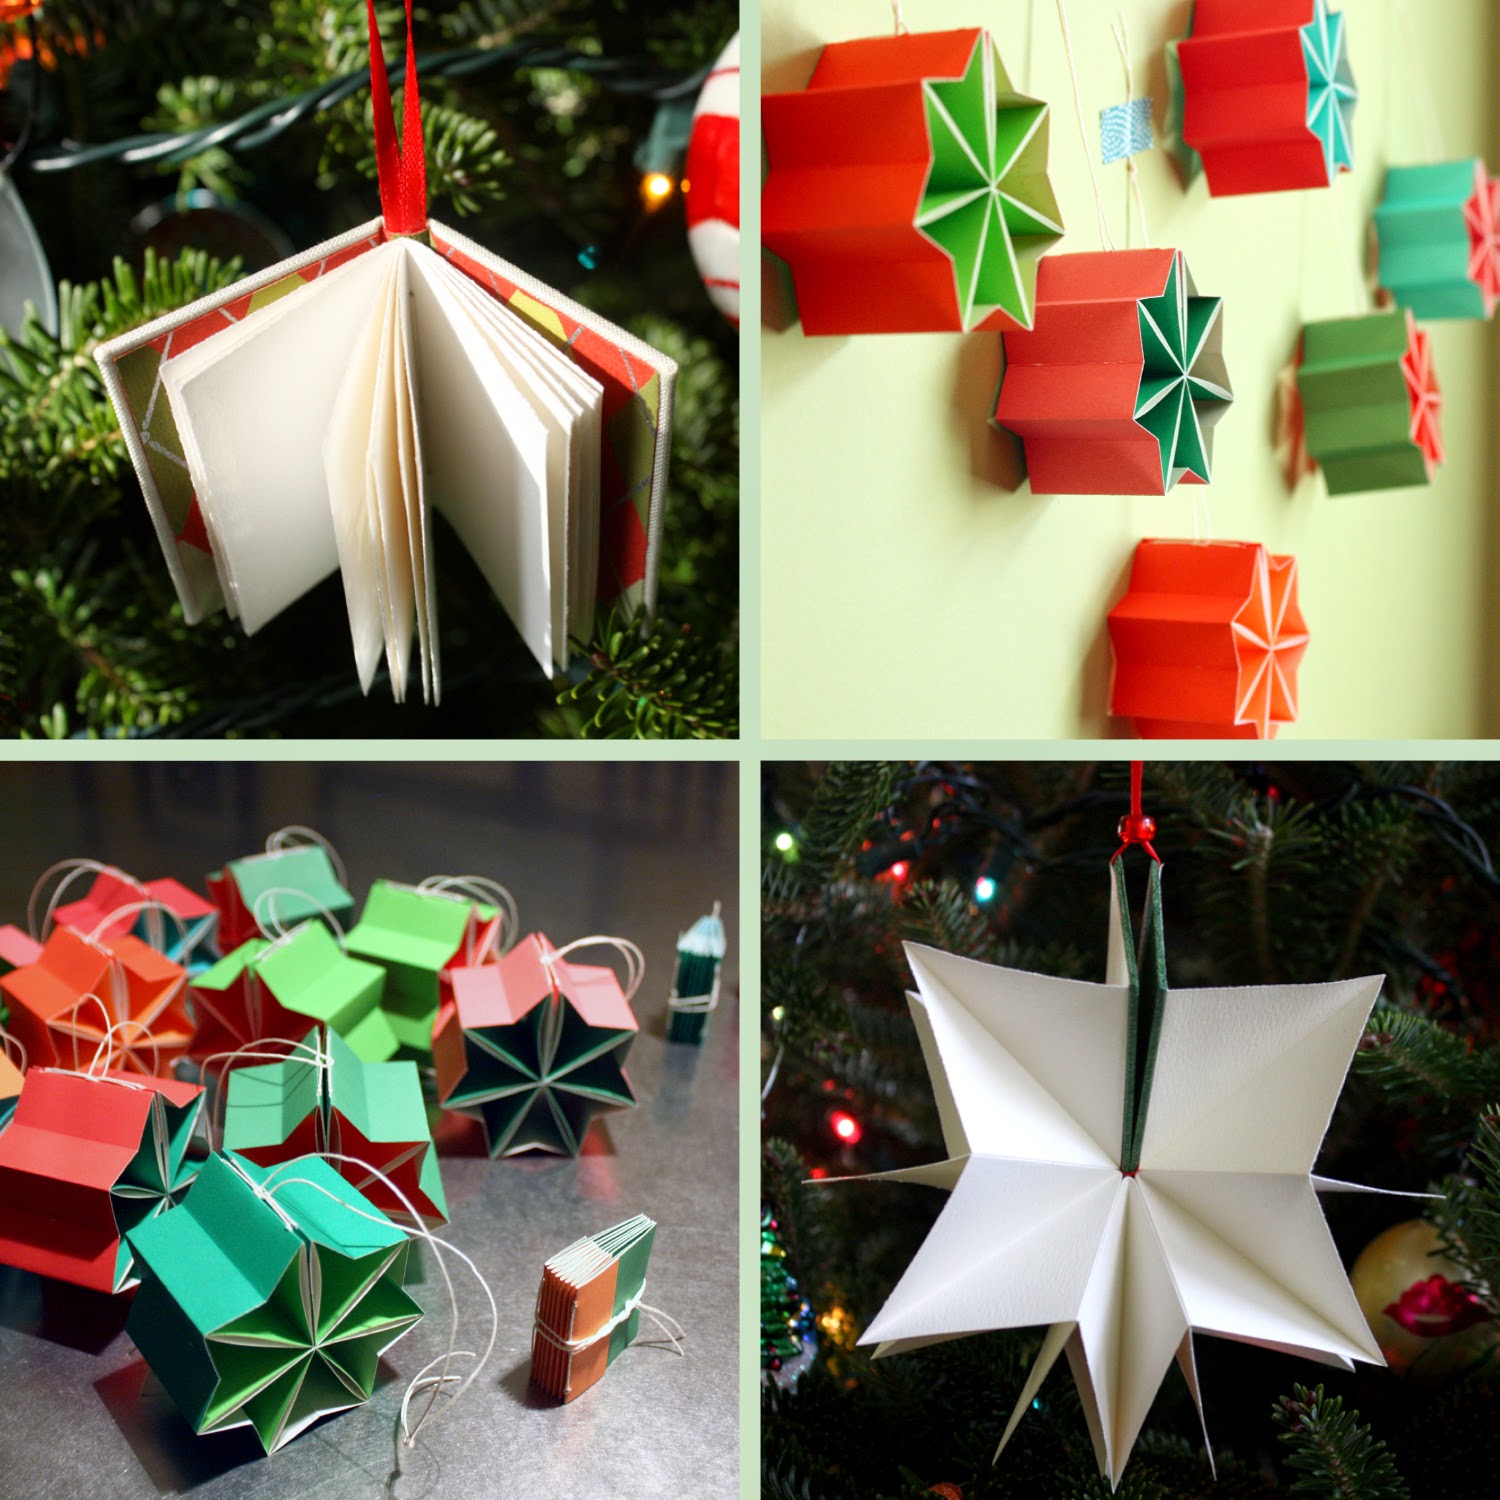 Hanmade book Christmas ornaments by linenlaidfelt in Nashville